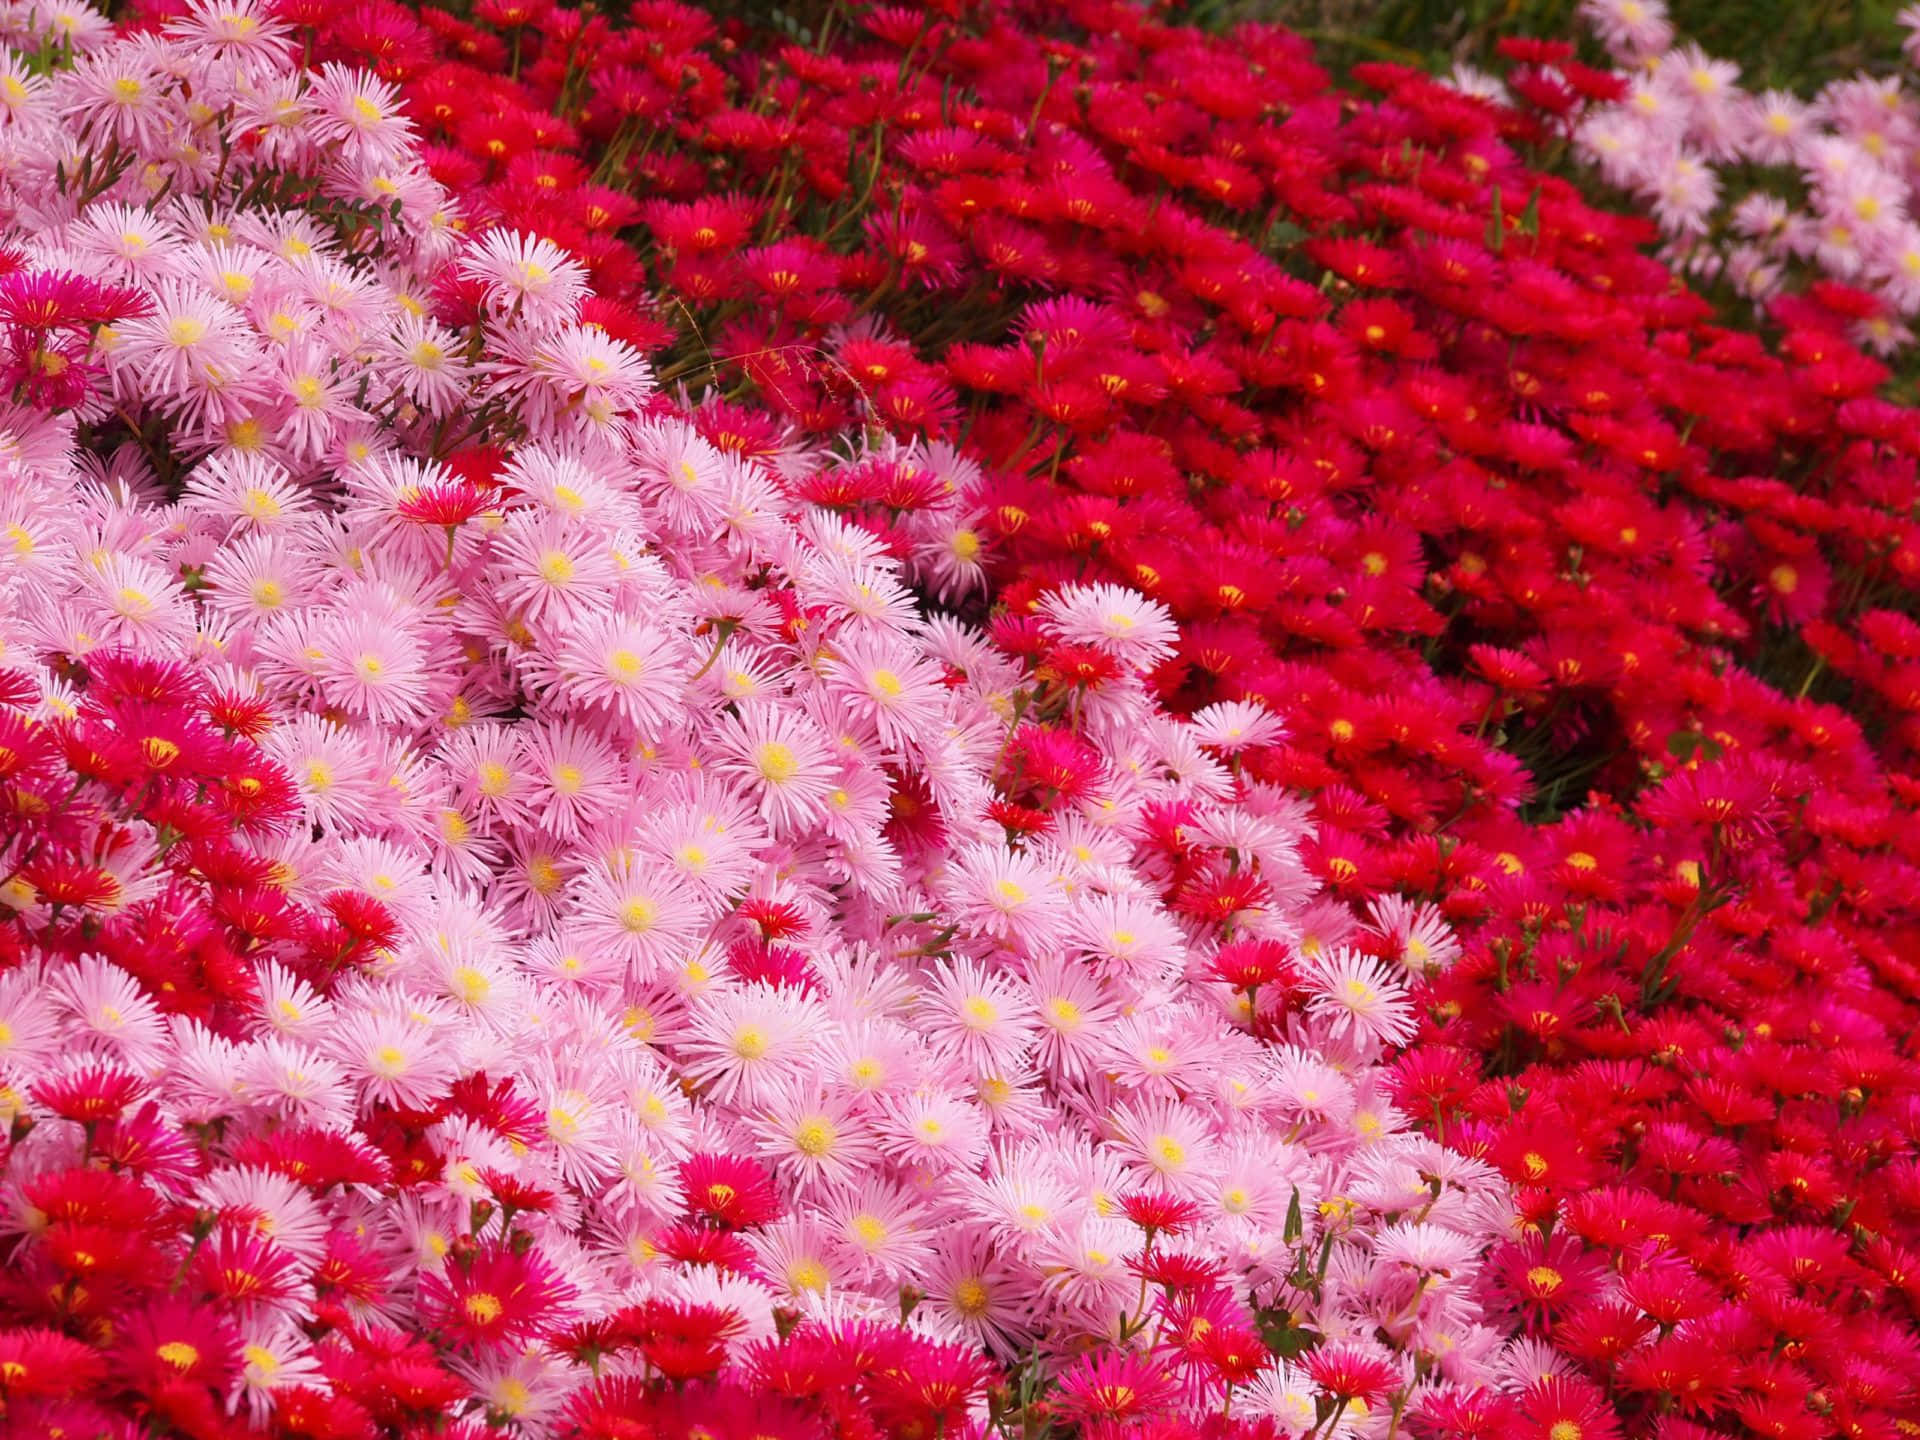 A Red And White Flower Bed